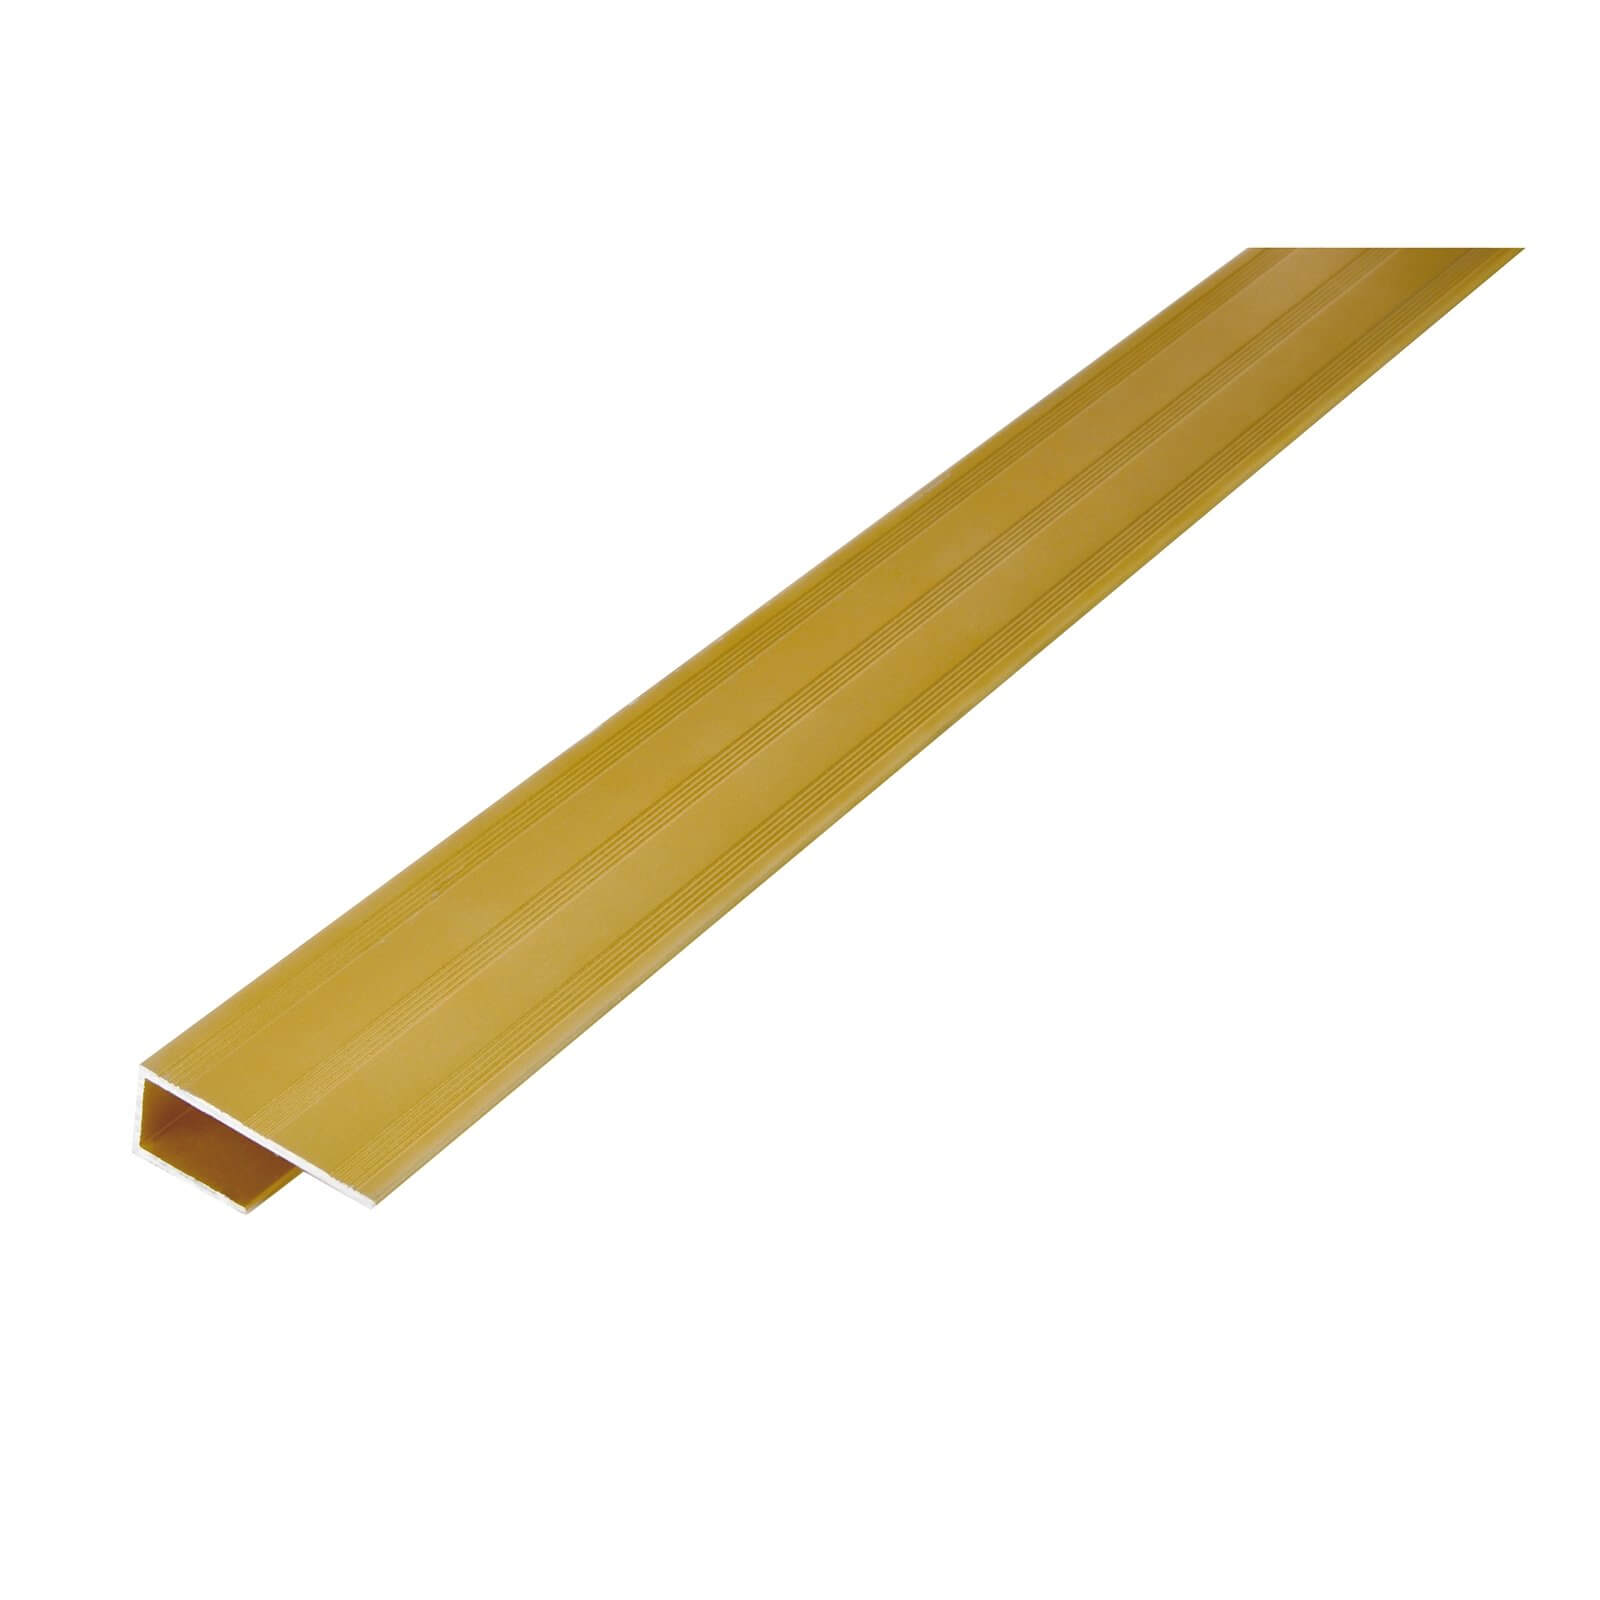 Photo of Cover Strip Stepped Laminate Floor Edge - Gold 1800mm